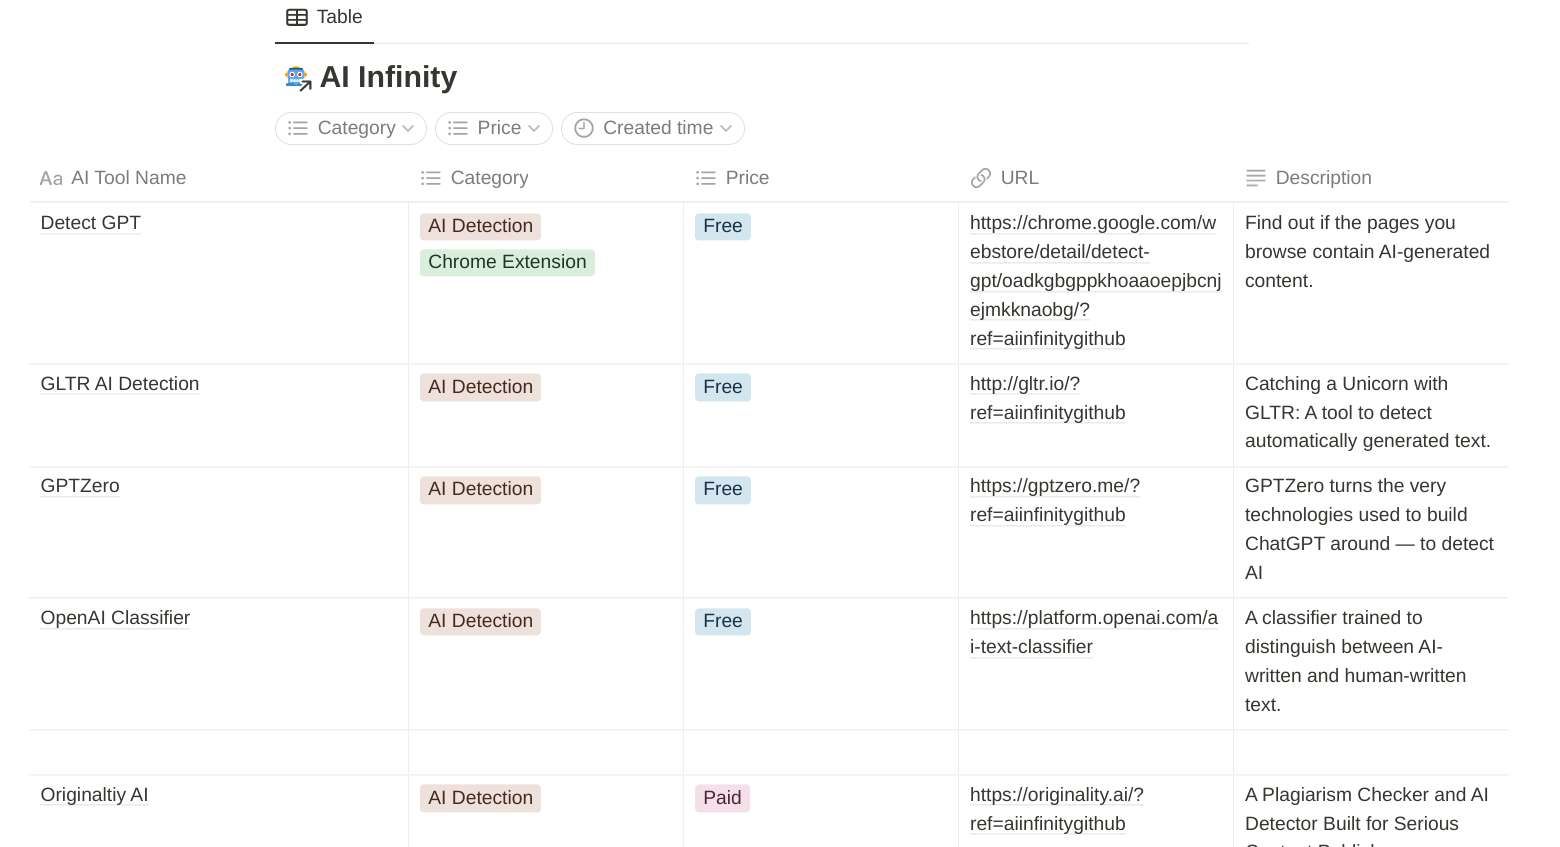 AI Infinity is one of the few AI tools directories that uses a Notion database, making it easier to browse